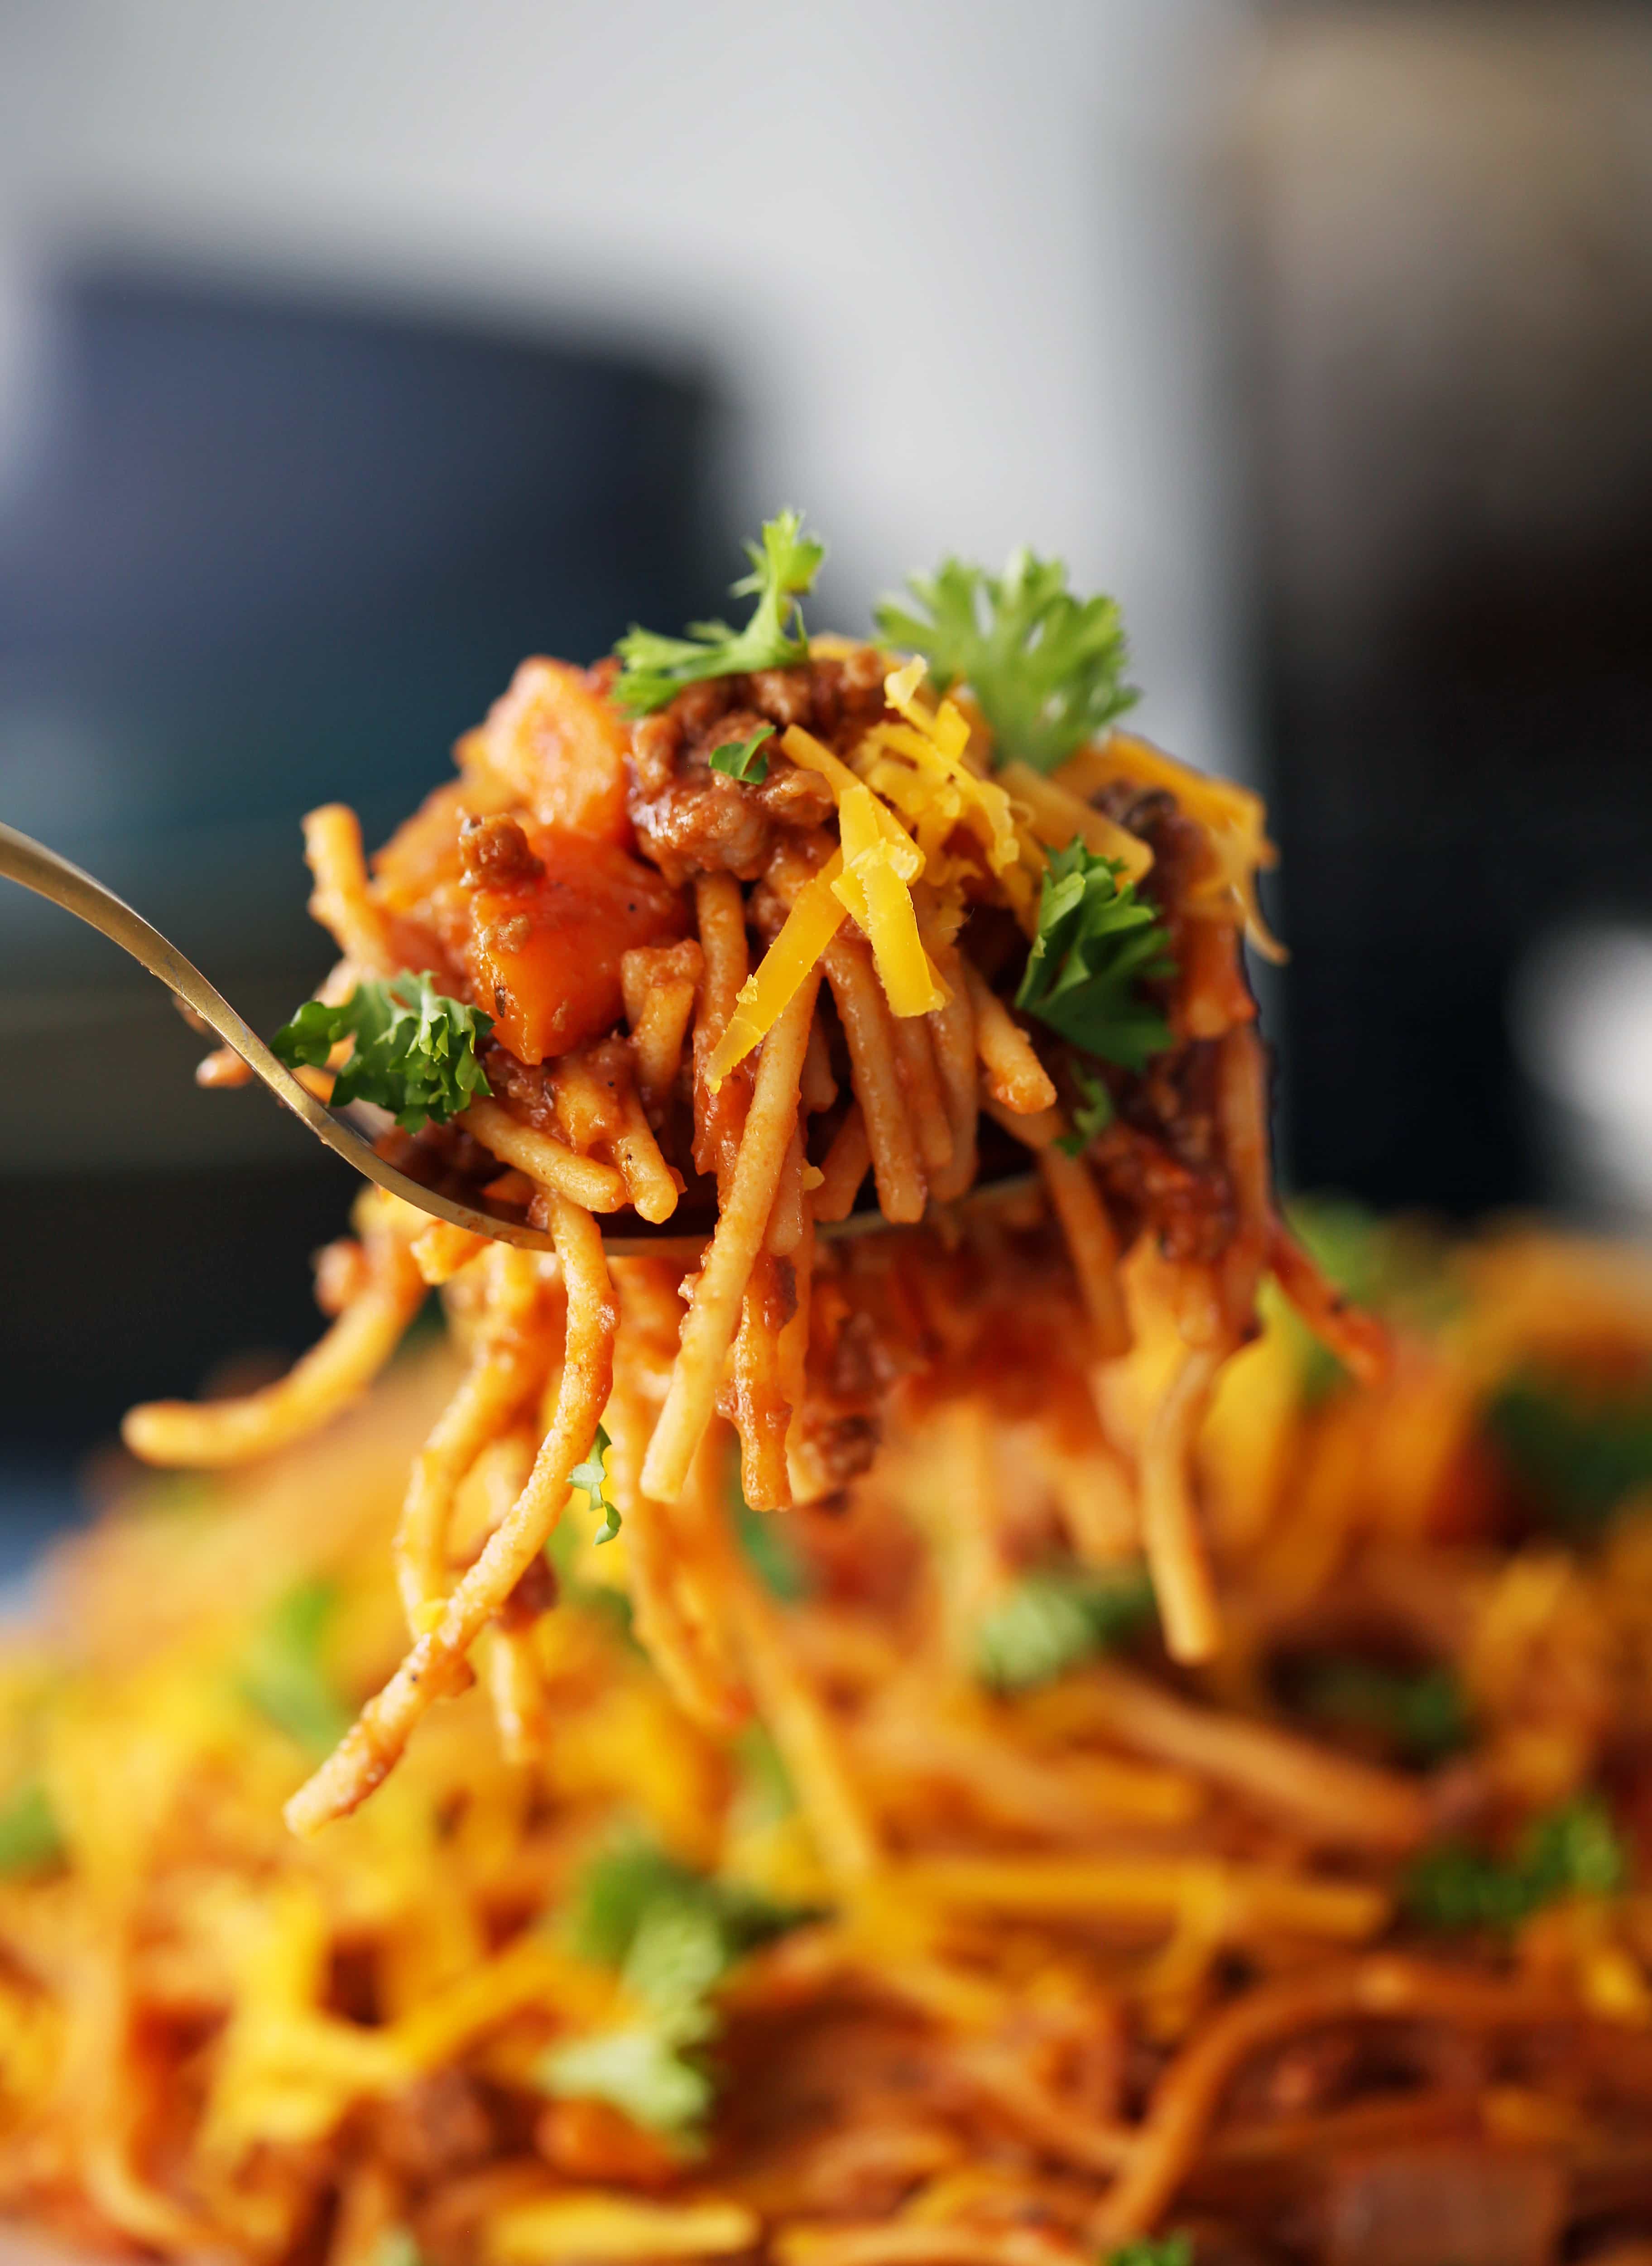 A closeup view of a fork holding Instant Pot spaghetti and meat sauce with cheese and parsley.